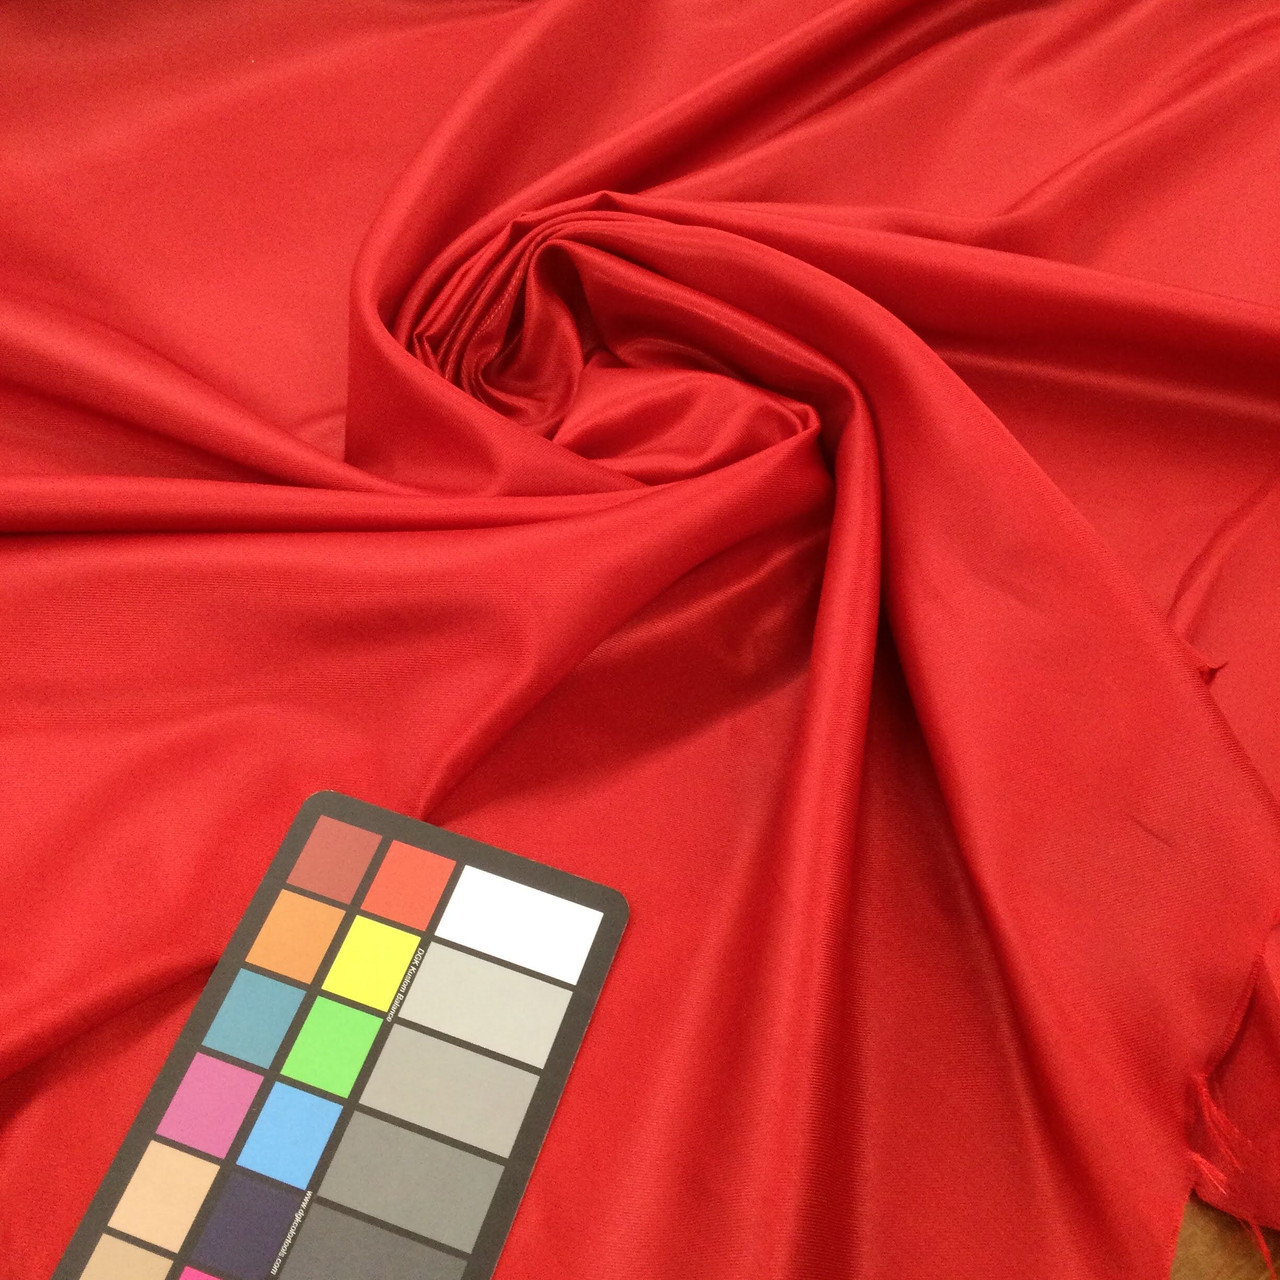 Dark Red Heavy Shiny Bridal Satin Fabric for Wedding Dress, 60 inches wide  sold by The Yard.